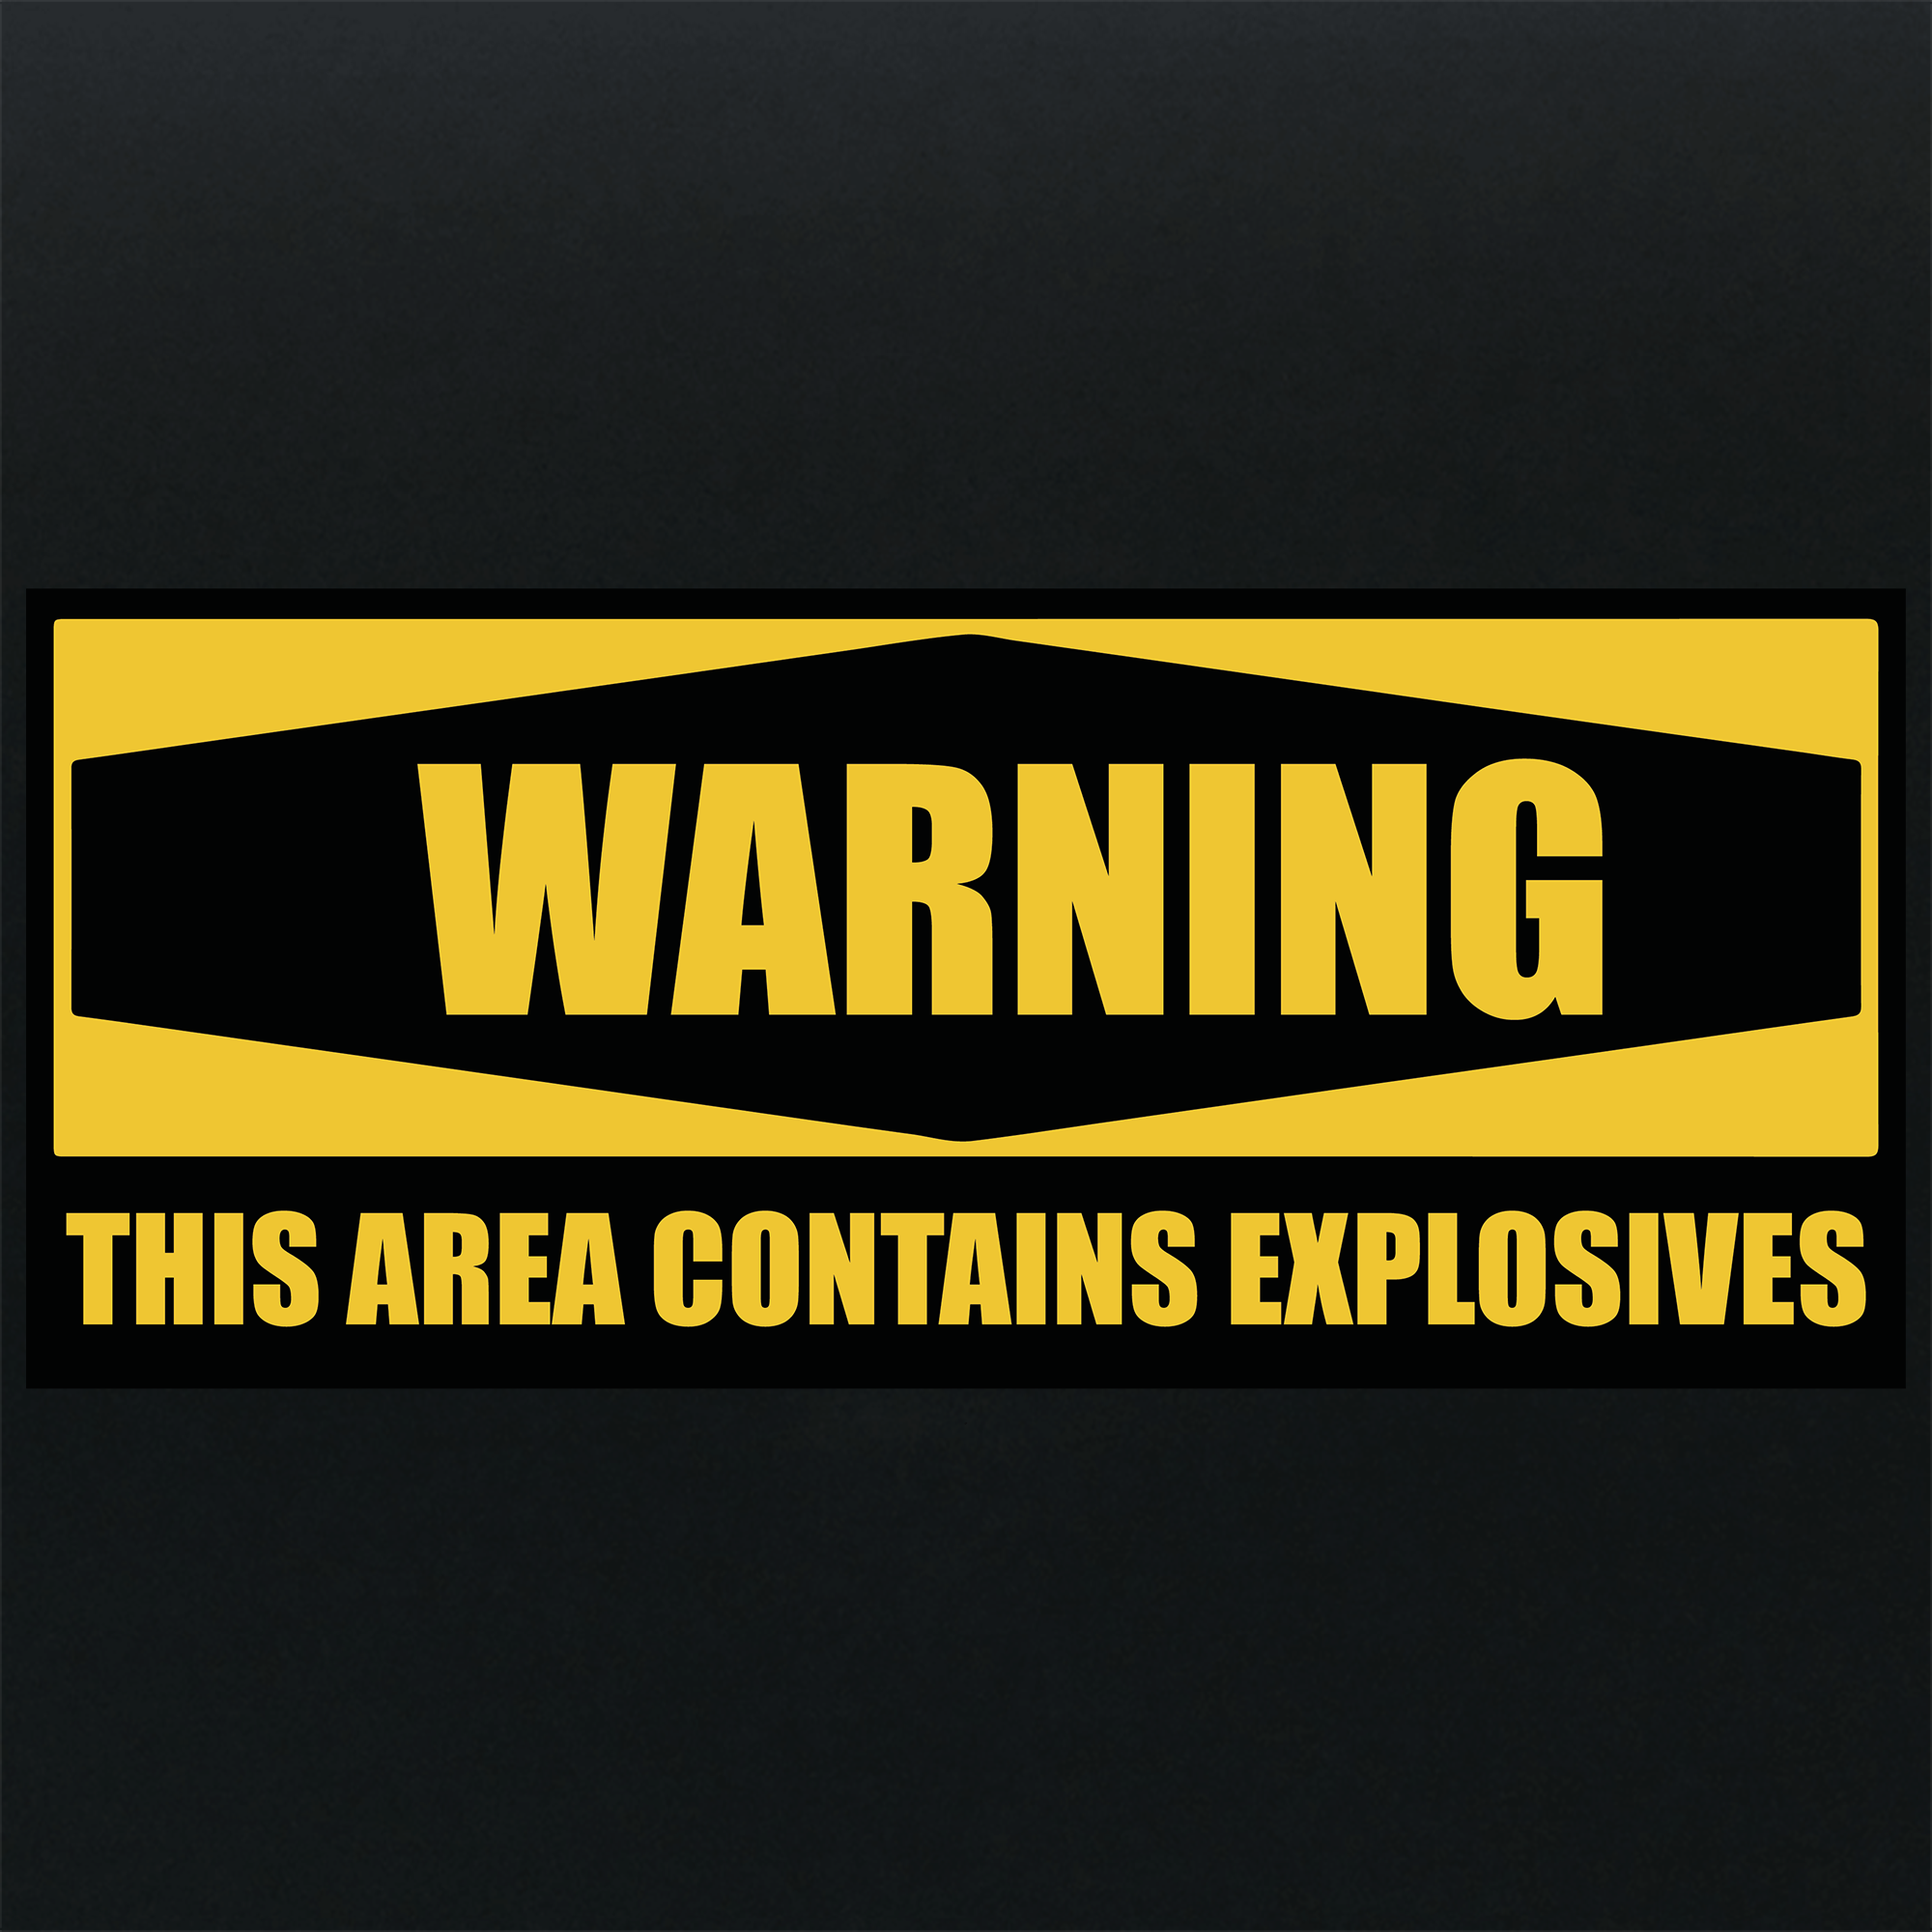 WARNING this area contains Explosives - Sign